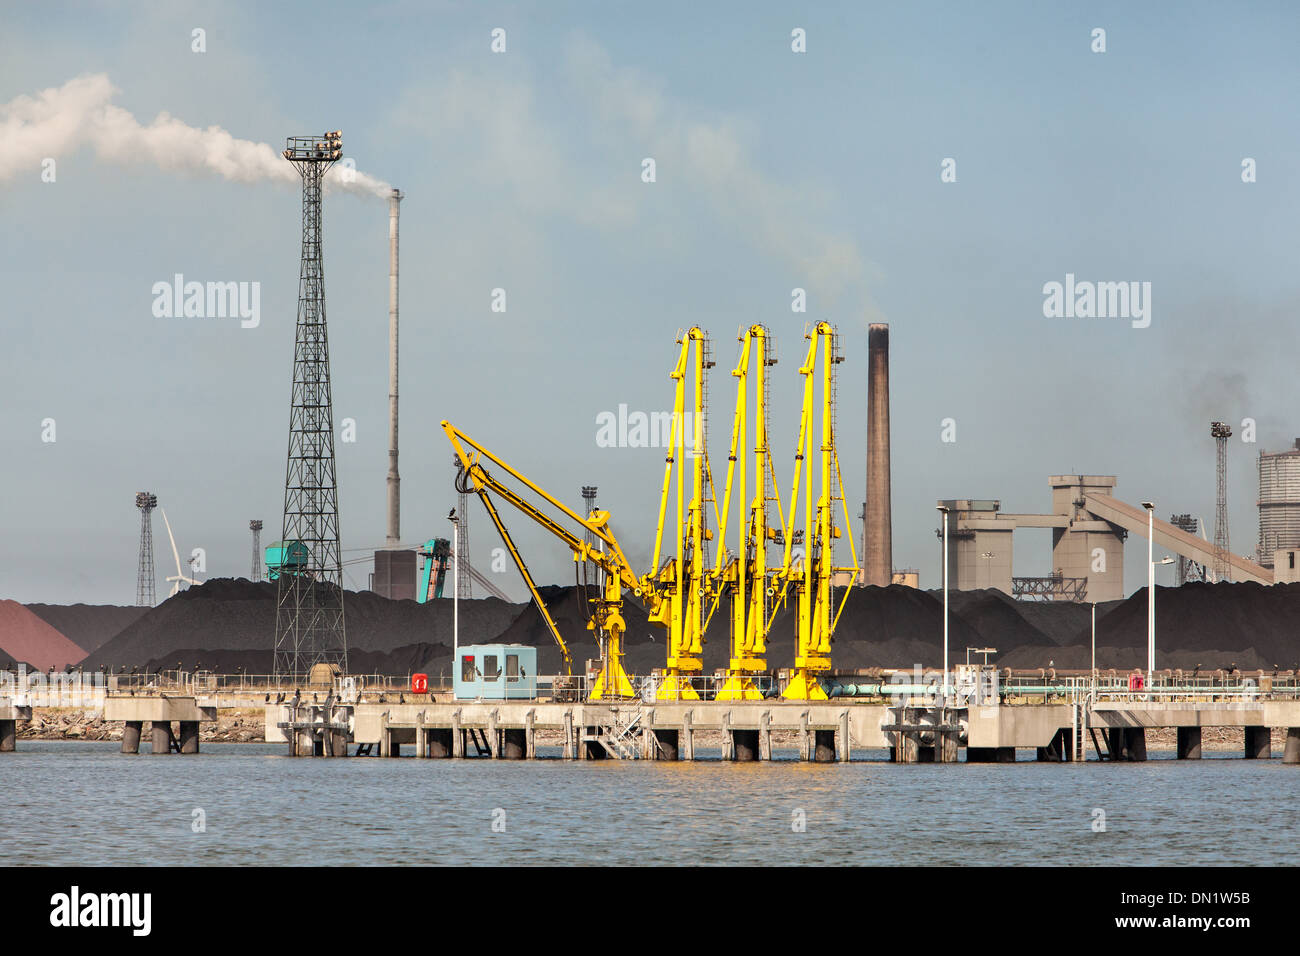 Industrial Shipping Terminals, River Tees,Teesside, England Stock Photo